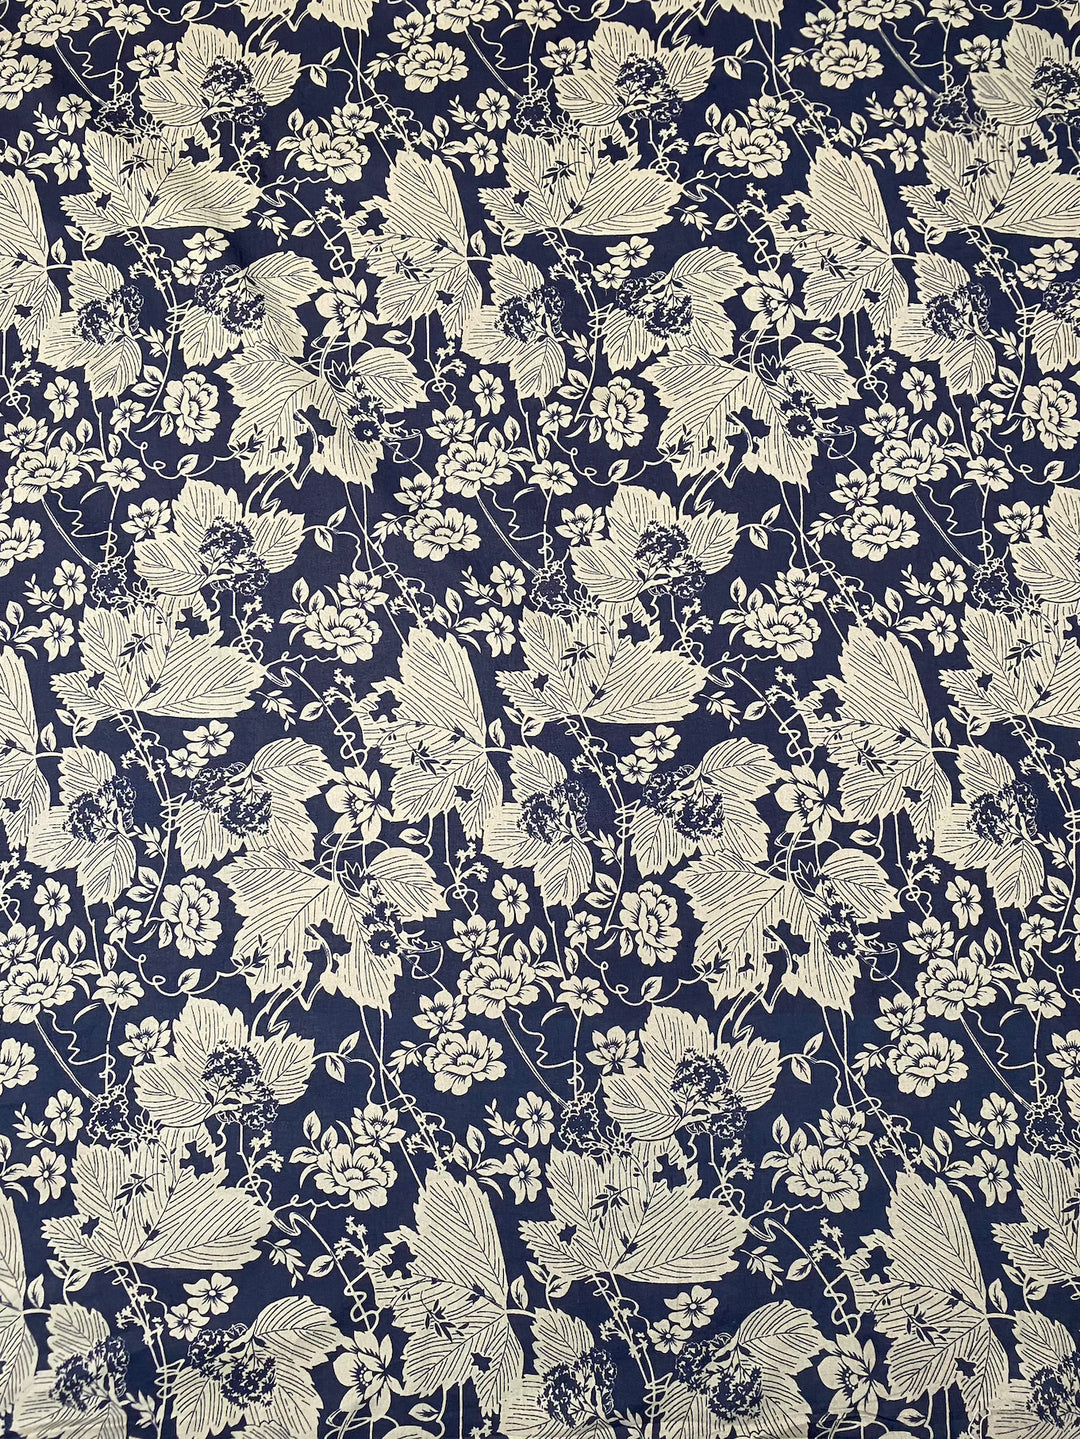 Printed Cotton Fabric Navy/Green